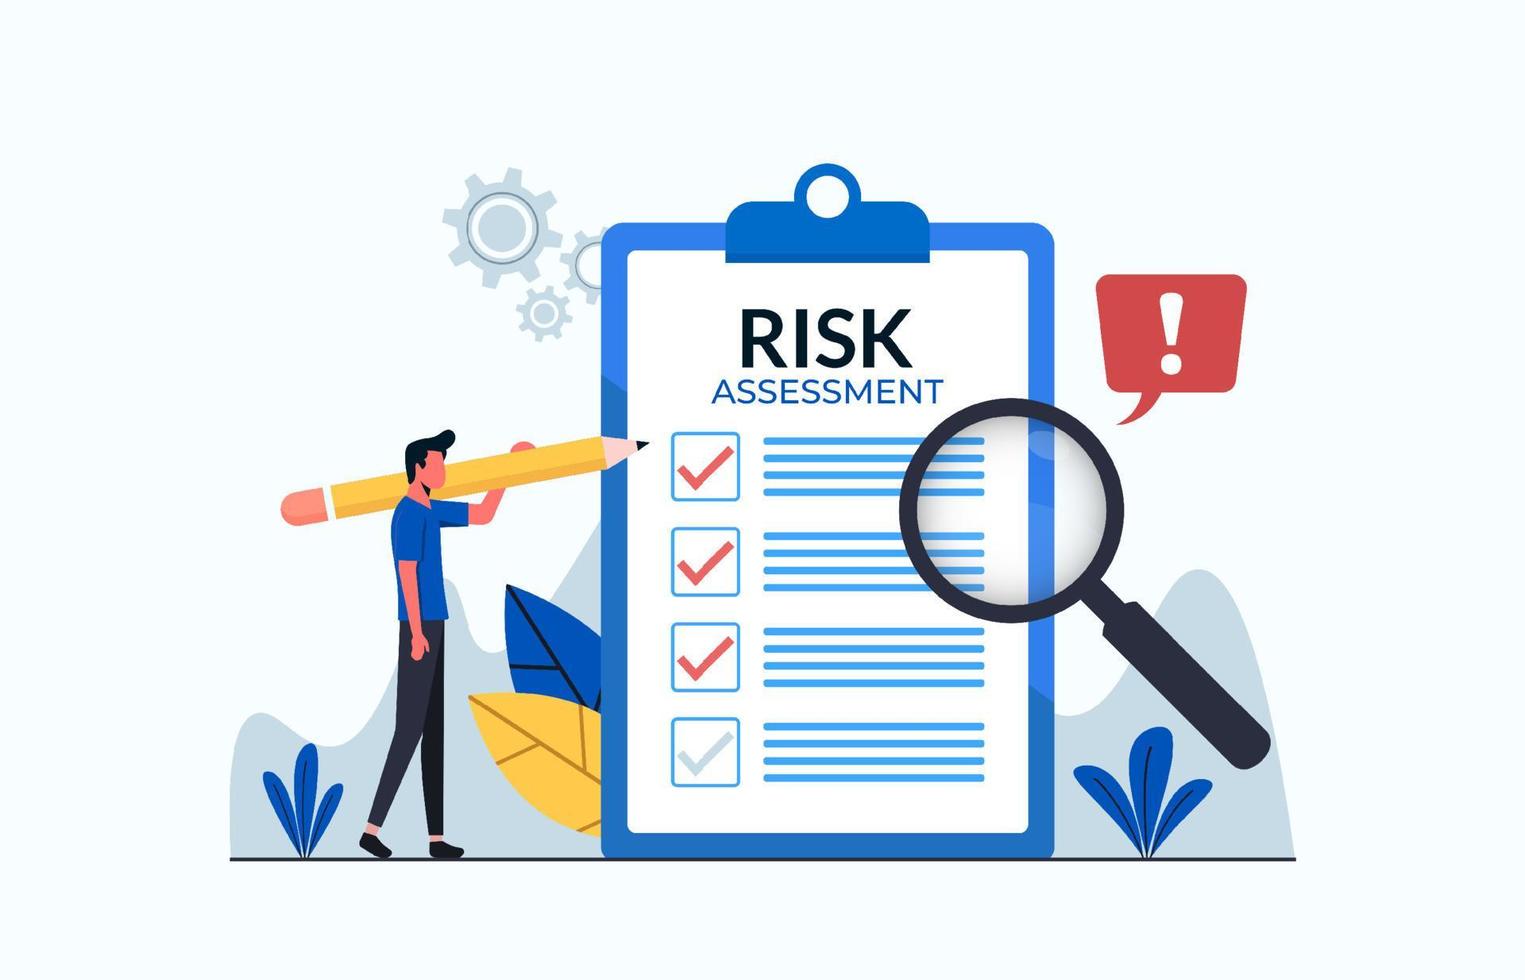 Risk assessment concept with form and magnifier vector illustration.